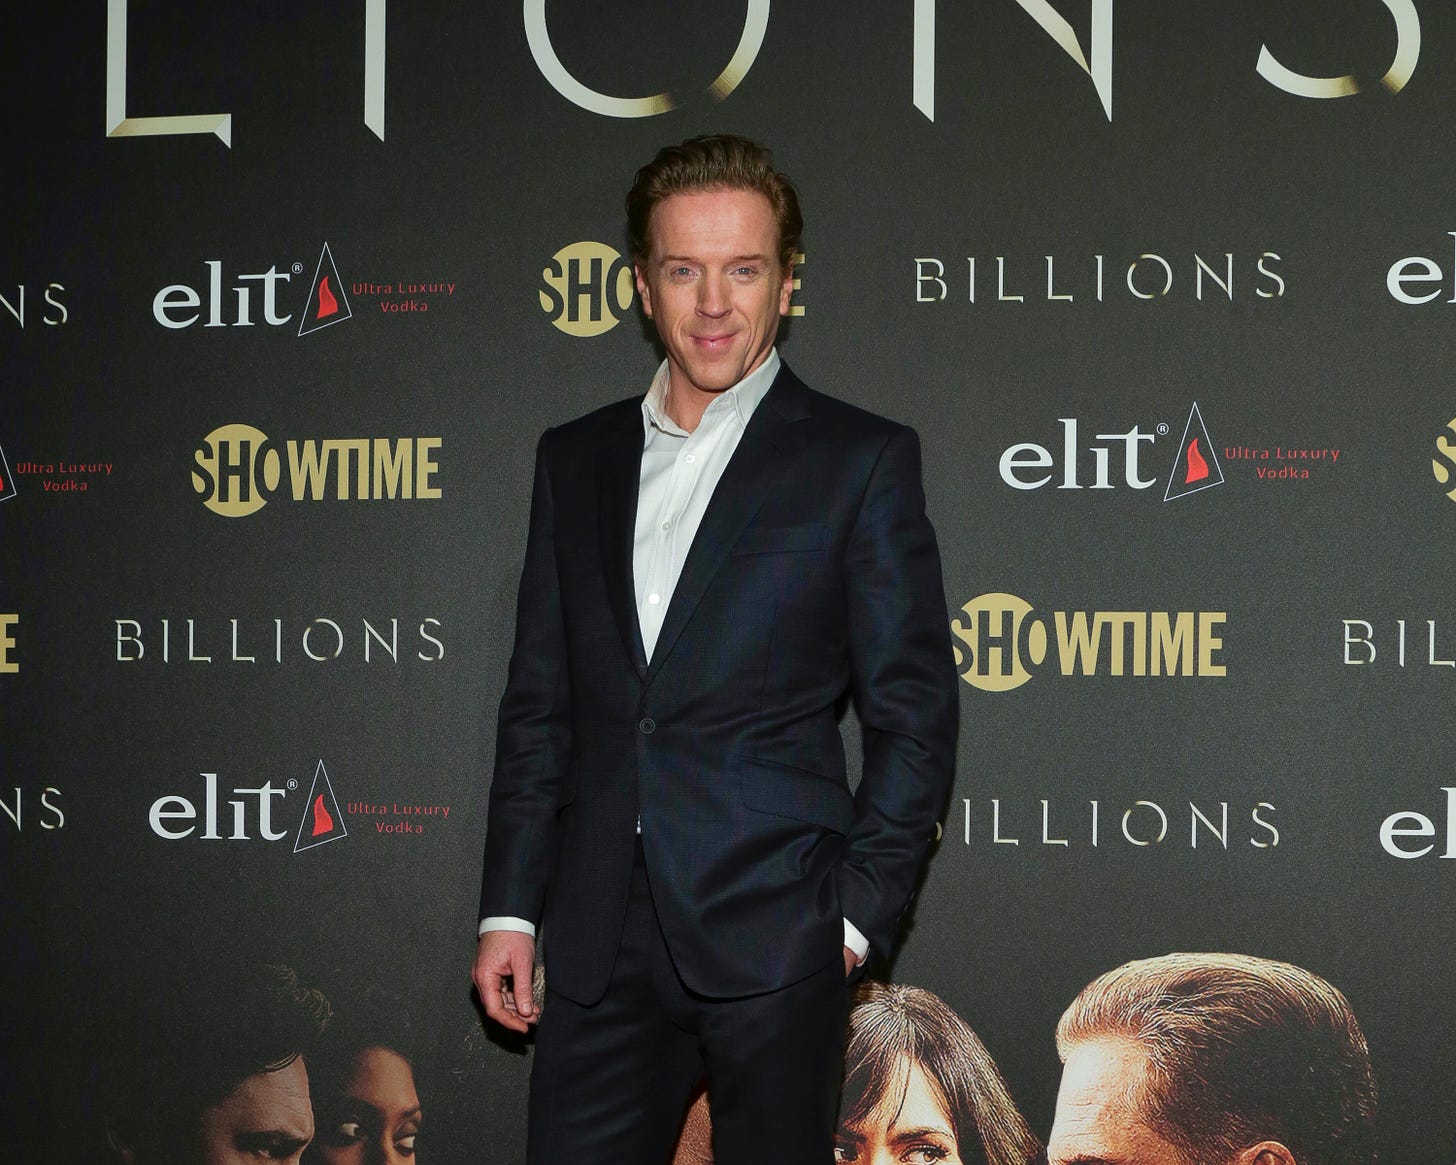 Damian Lewis, an actor who played a character loosely based on hedge fund manager Steve Cohen in Showtime’s “Billions.) (Getty Images)